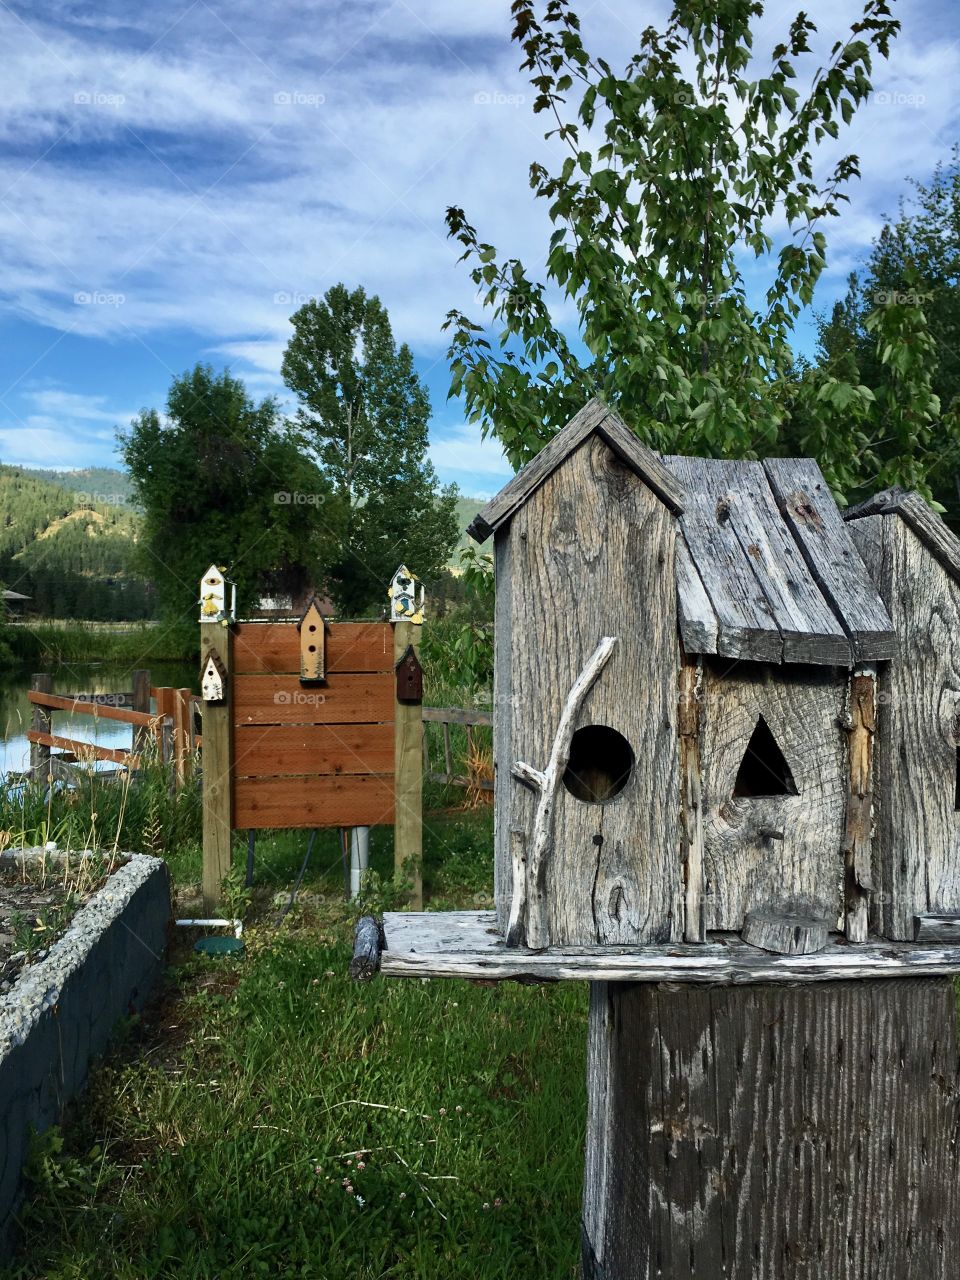 Bird houses in the country side. 